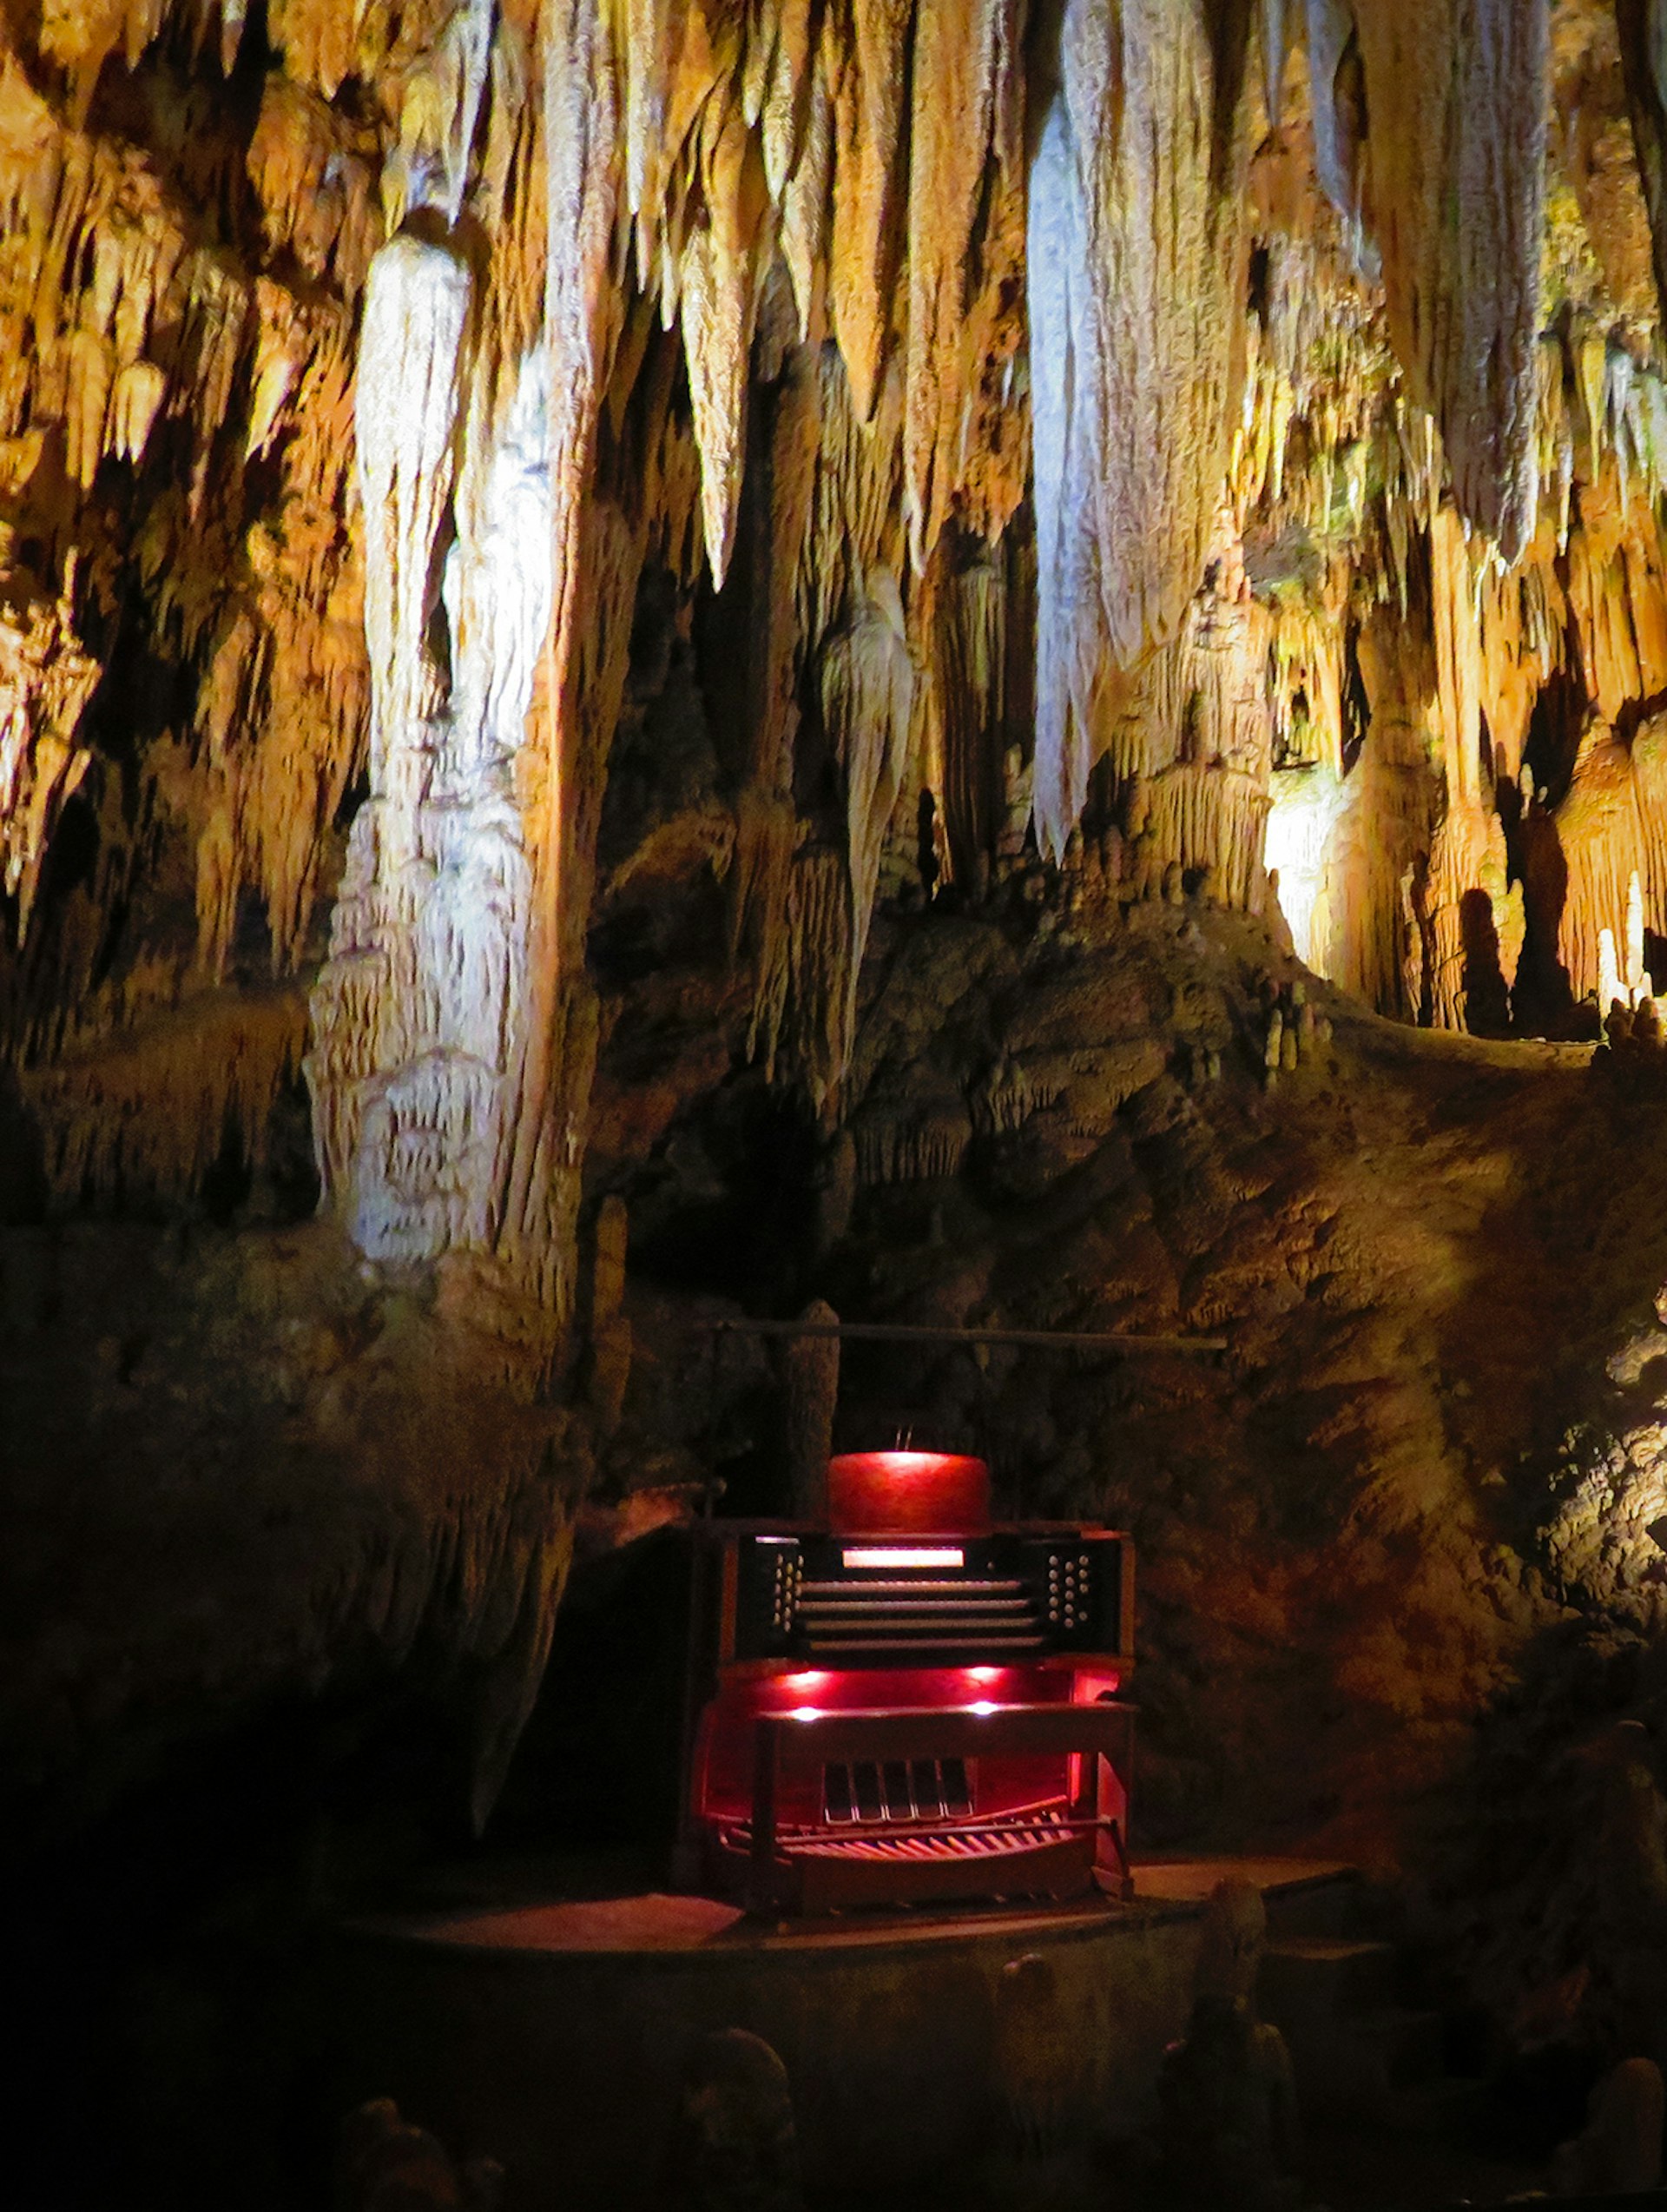 A small organ – which plays notes on stalactites – glows red and is framed by tan stalactites underground in Luray Caverns, Virginia